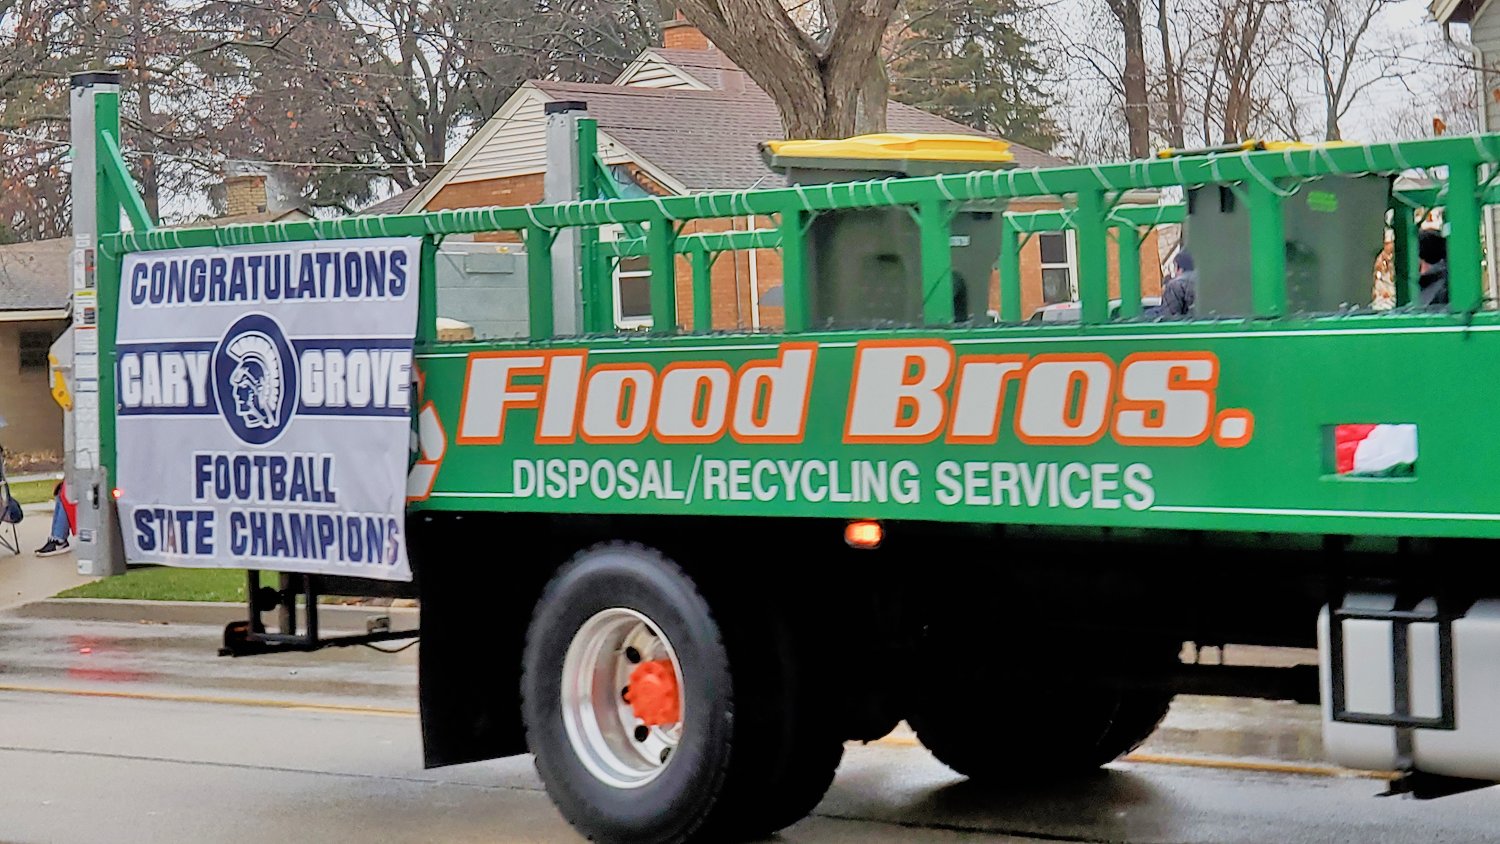 Flood Brothers Disposal Company truck.